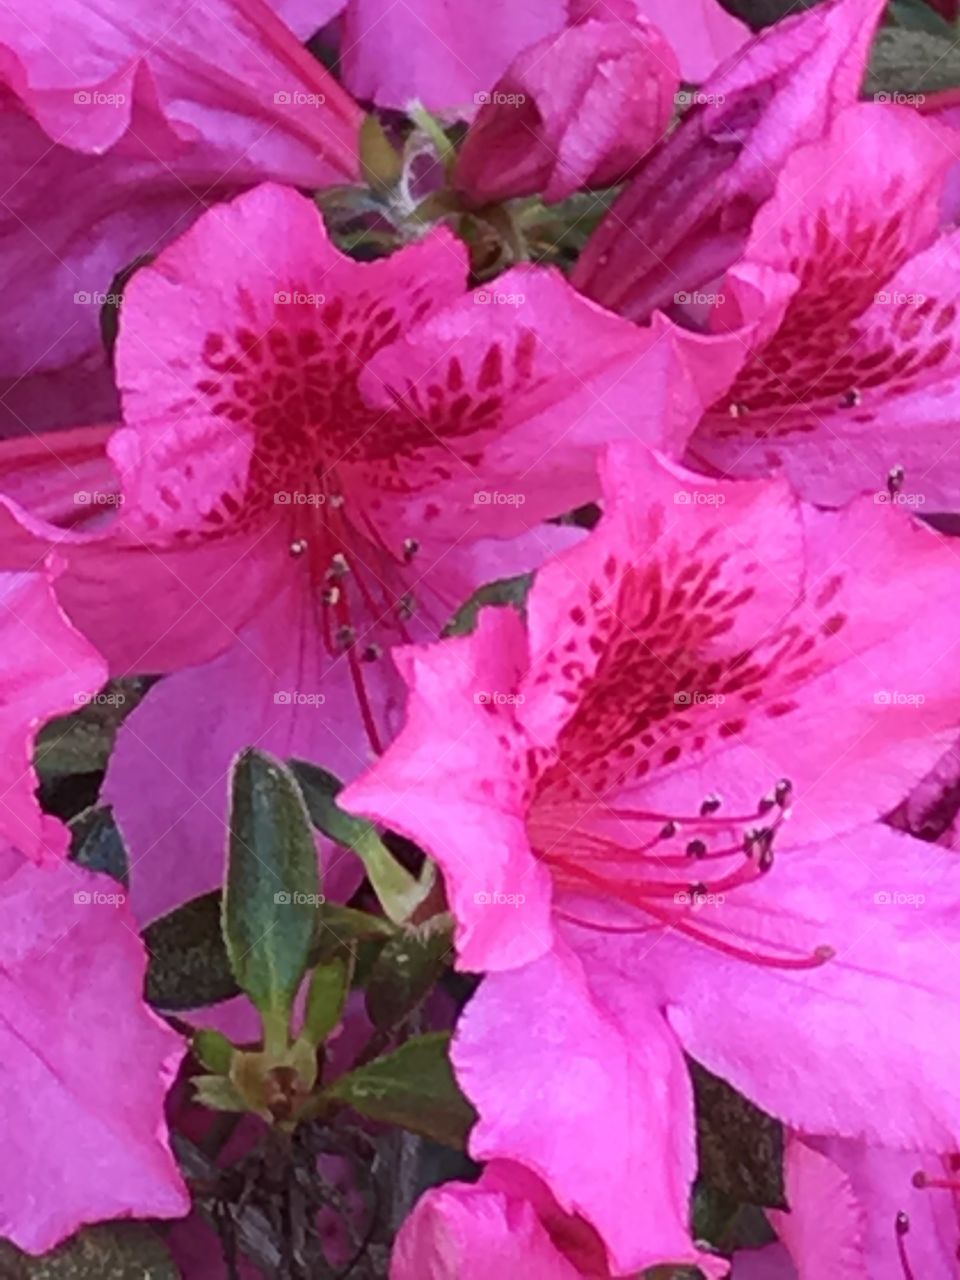 I love flowers with beautiful vibrant colors.  This purple Azalea is a great example of vibrant colors!